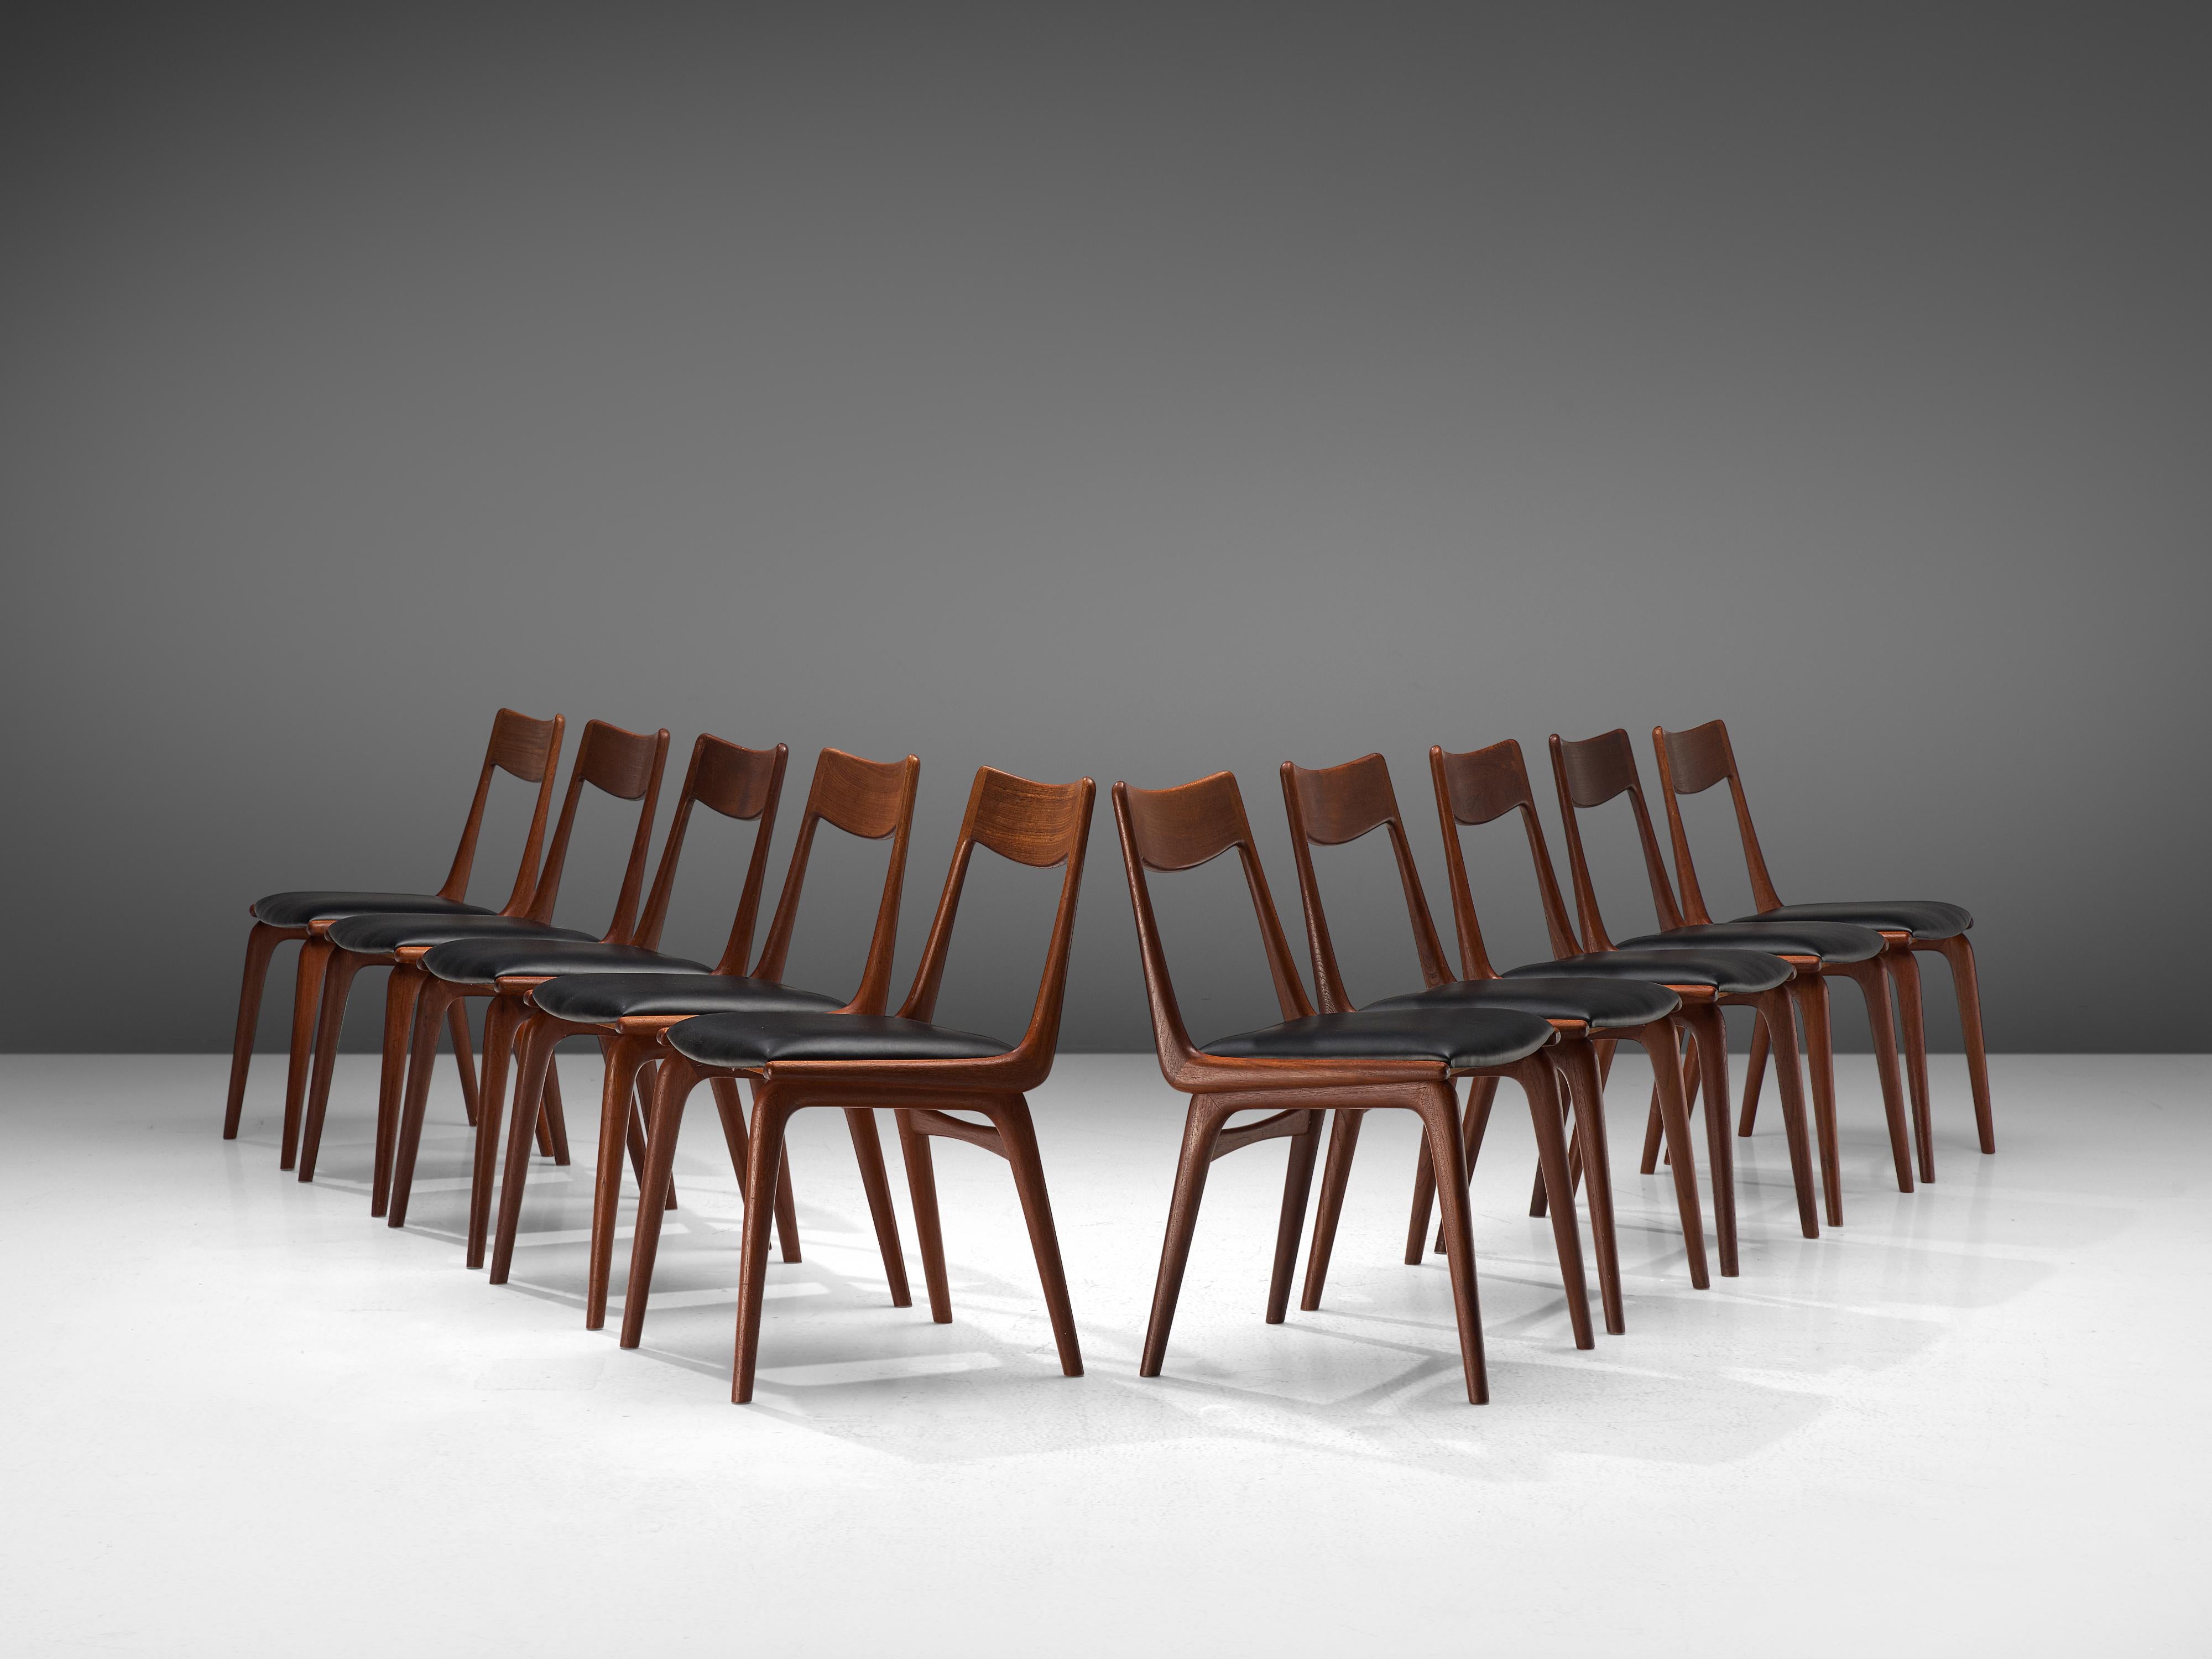 Alfred Christensen for Slagelse Møbelvaerk, set of 10 dining chairs model 370, teak, leatherette, Denmark, 1960s

Elegant set of Danish dining chairs, featuring a teak frame. Seen from the side, the seat's frame that flows over to the backrest has a